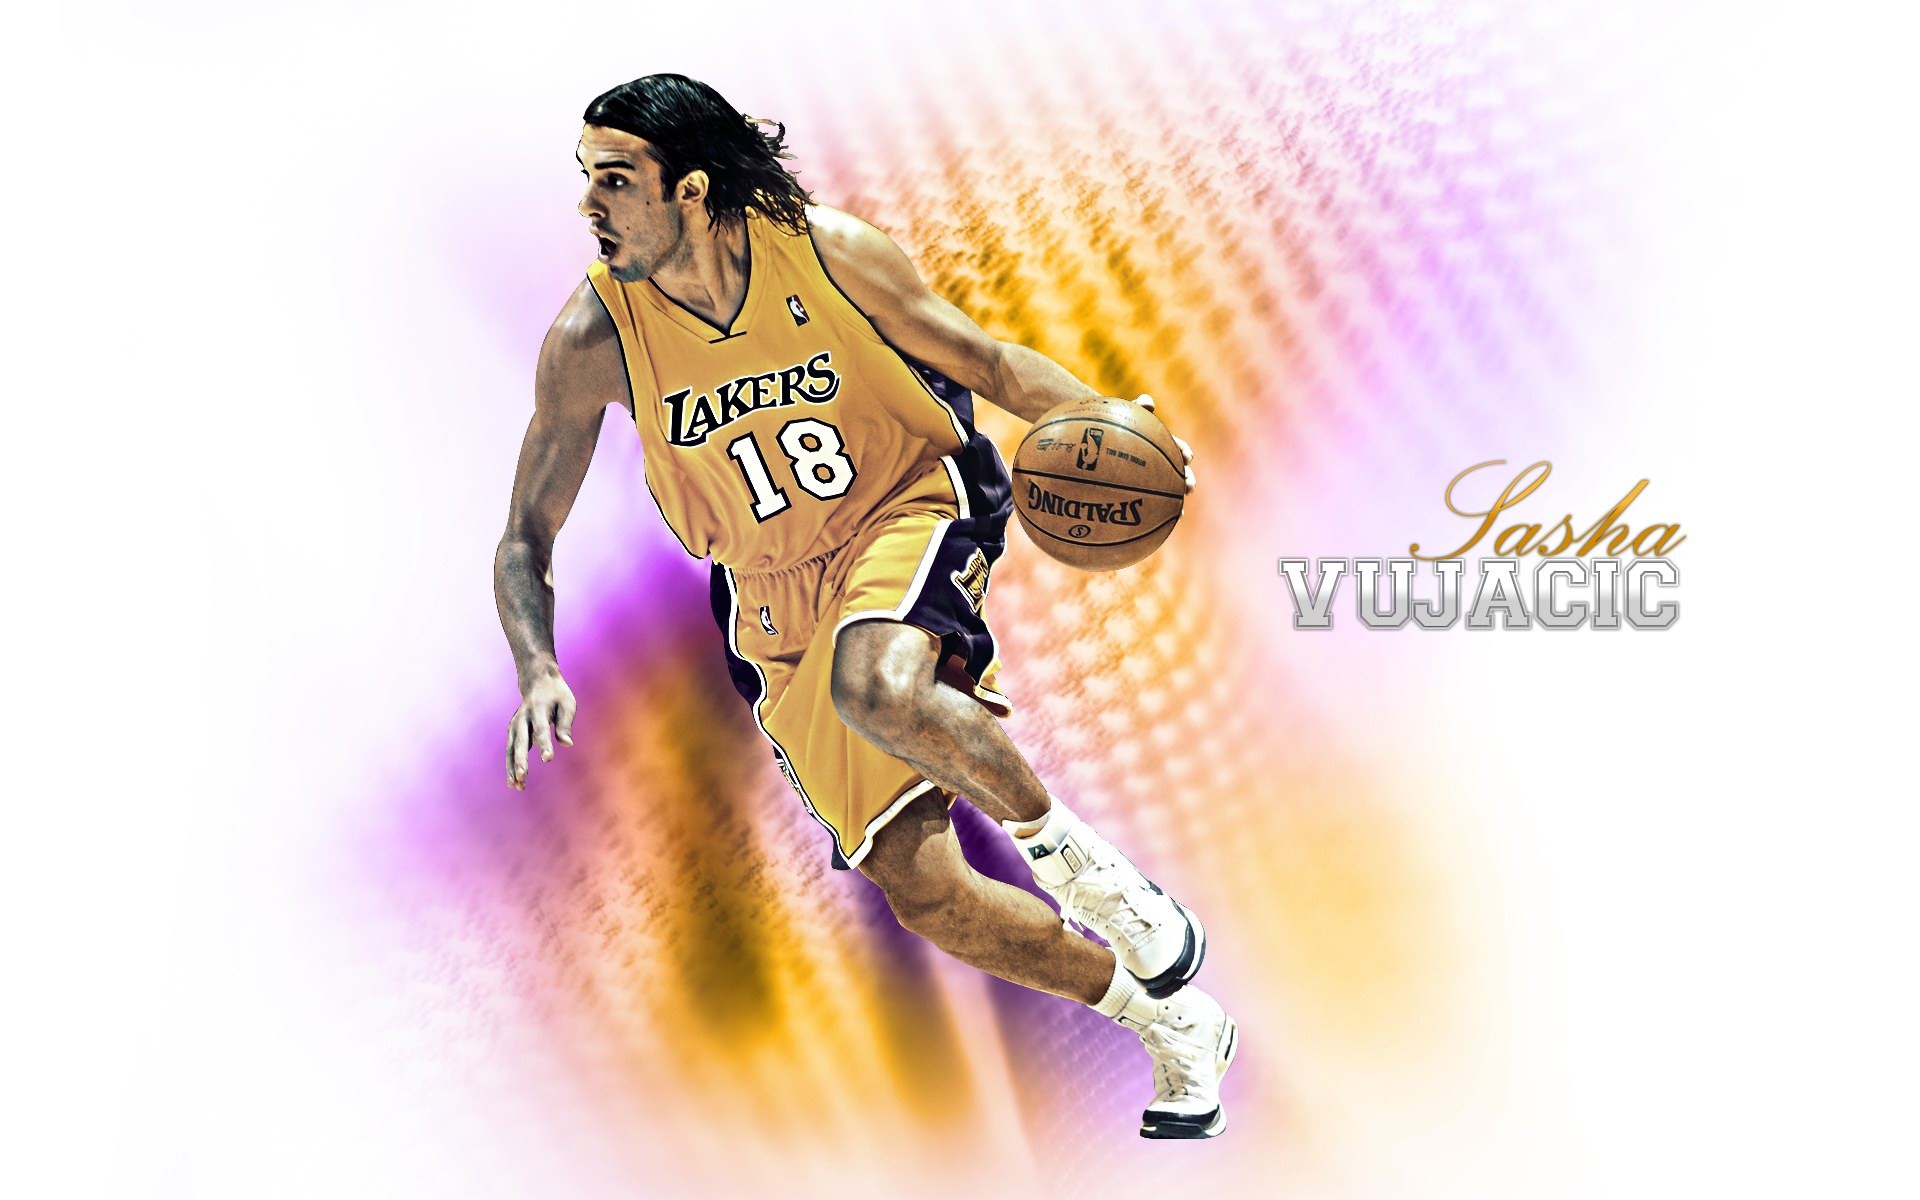 Los Angeles Lakers Official Wallpaper #23 - 1920x1200